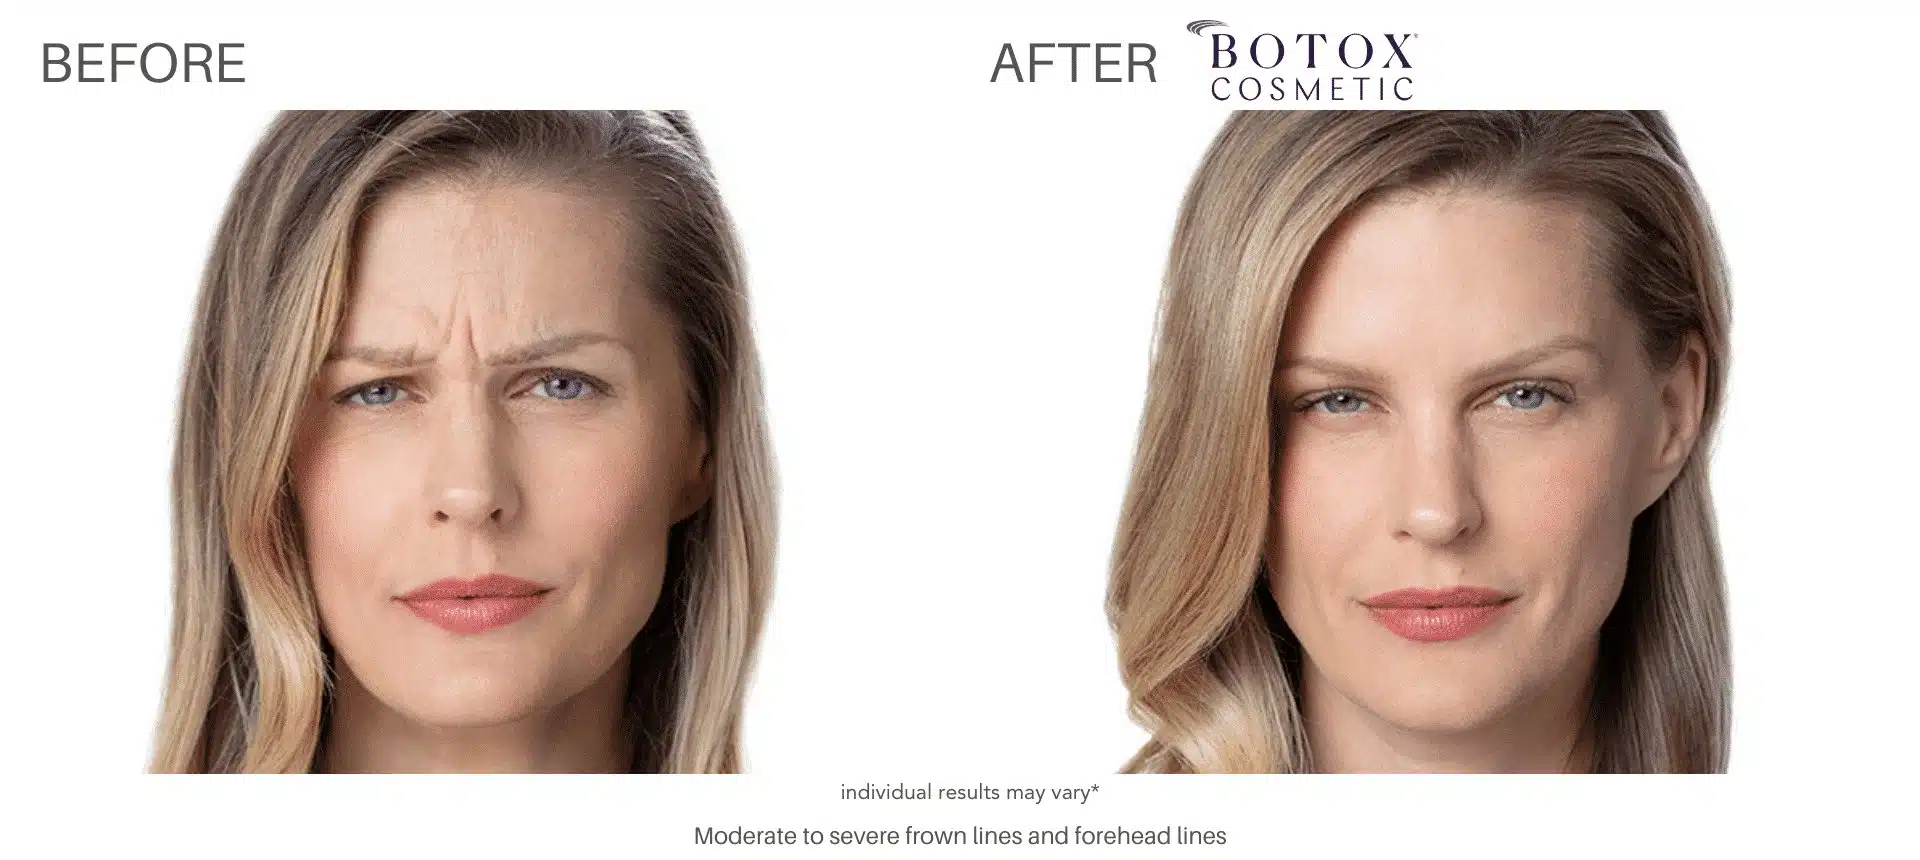 Botox before and after 1